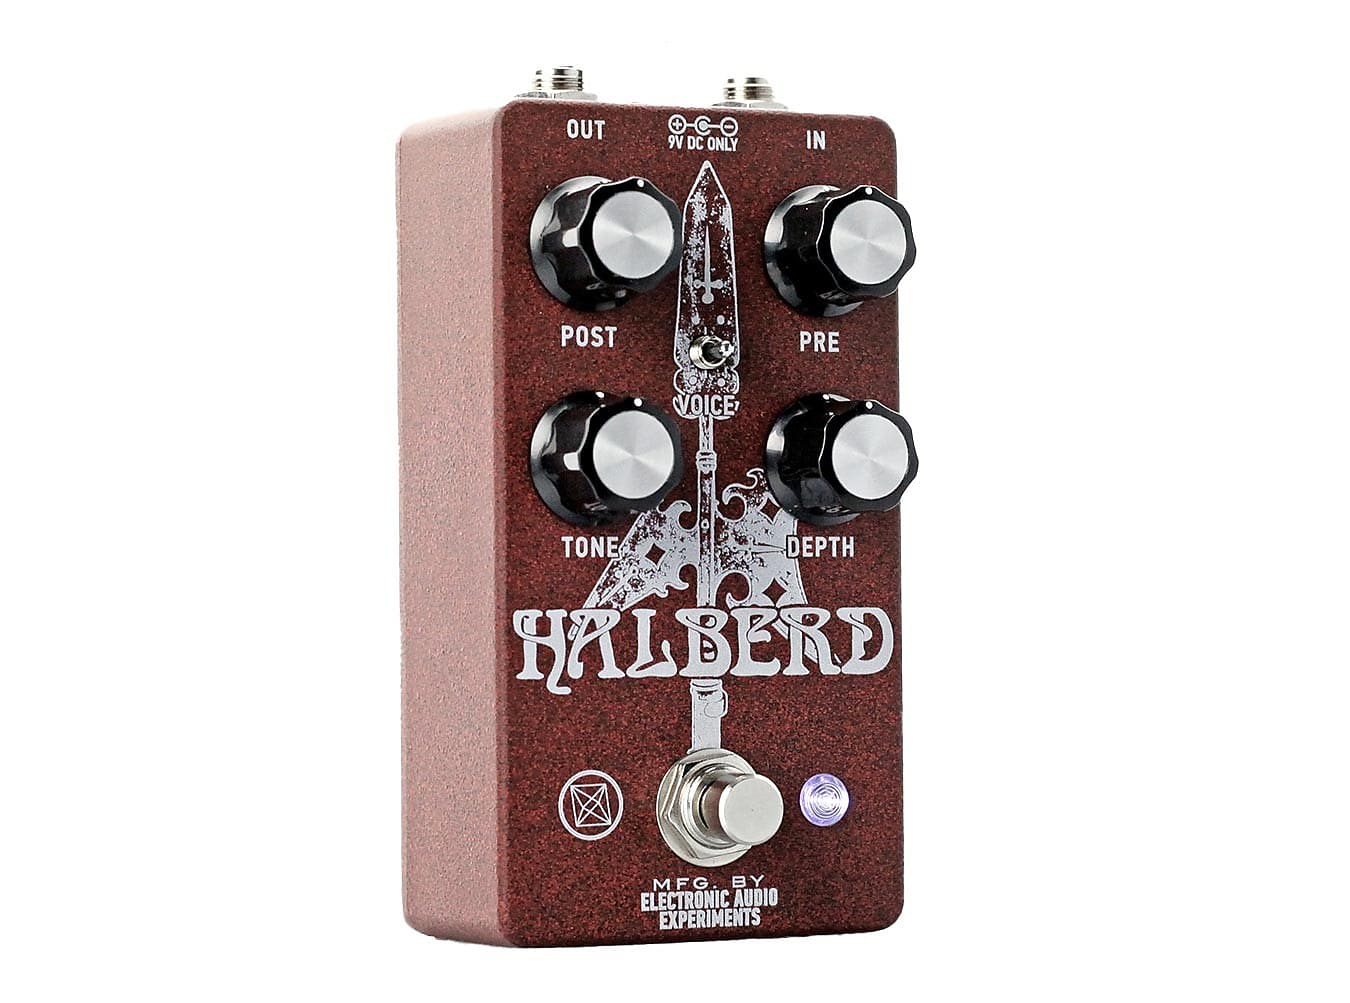 Electronic Audio Experiments Halberd Overdrive Effects Pedal